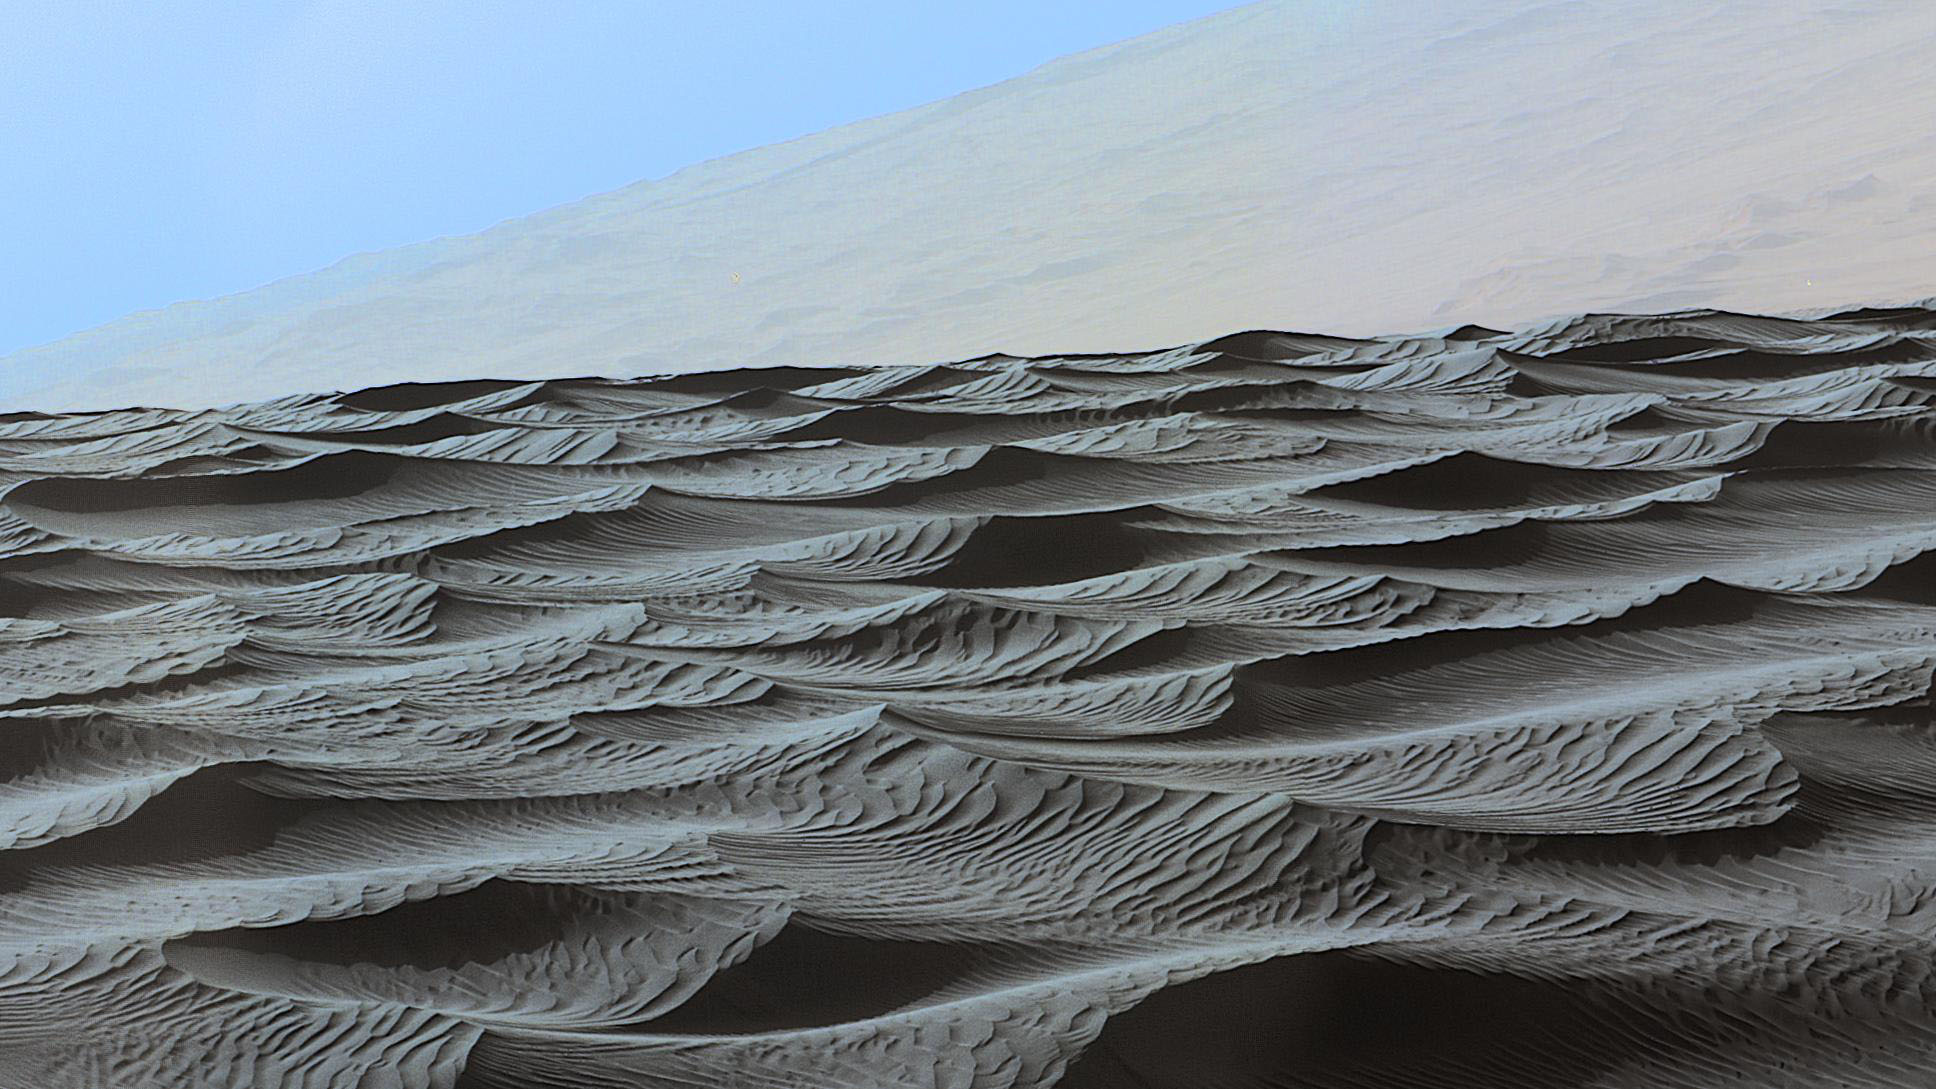 Two sizes of ripples are evident in this view of a top of a Martian sand dune, from NASA's Curiosity Mars rover from Dec. 13, 2015. (NASA/JPL-Caltech/MSSS)